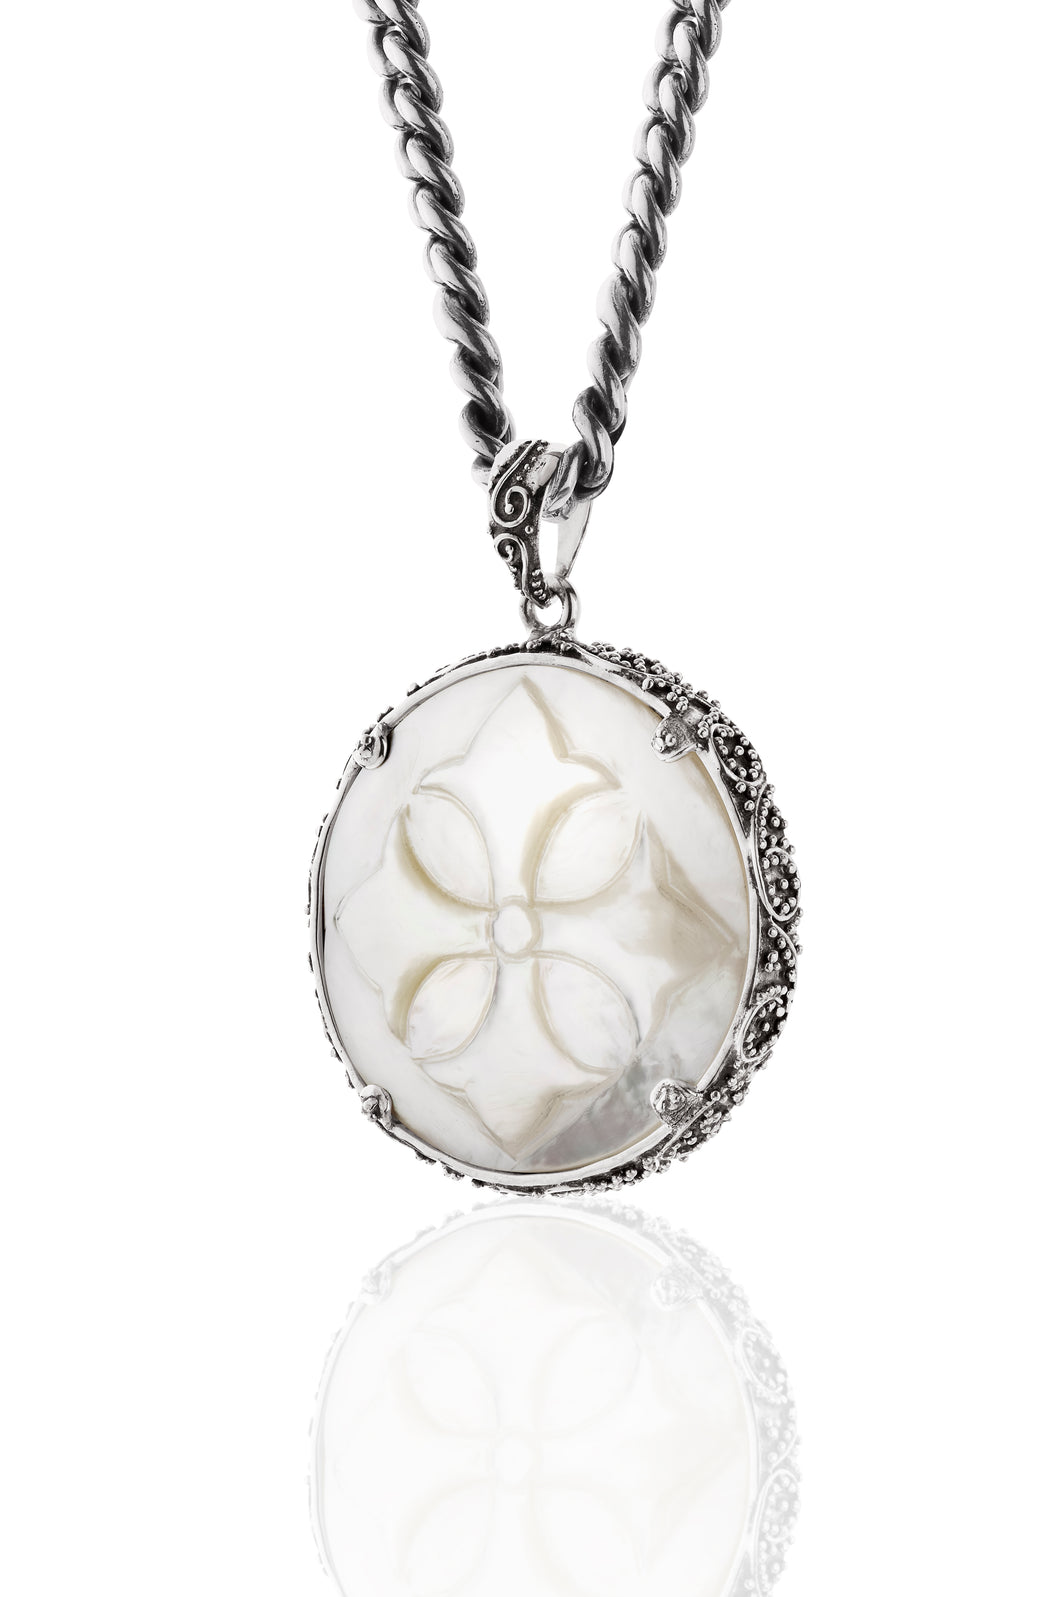 Samantha Large Round Pendant - pendant - KIR Collection - designer sterling silver jewelry 